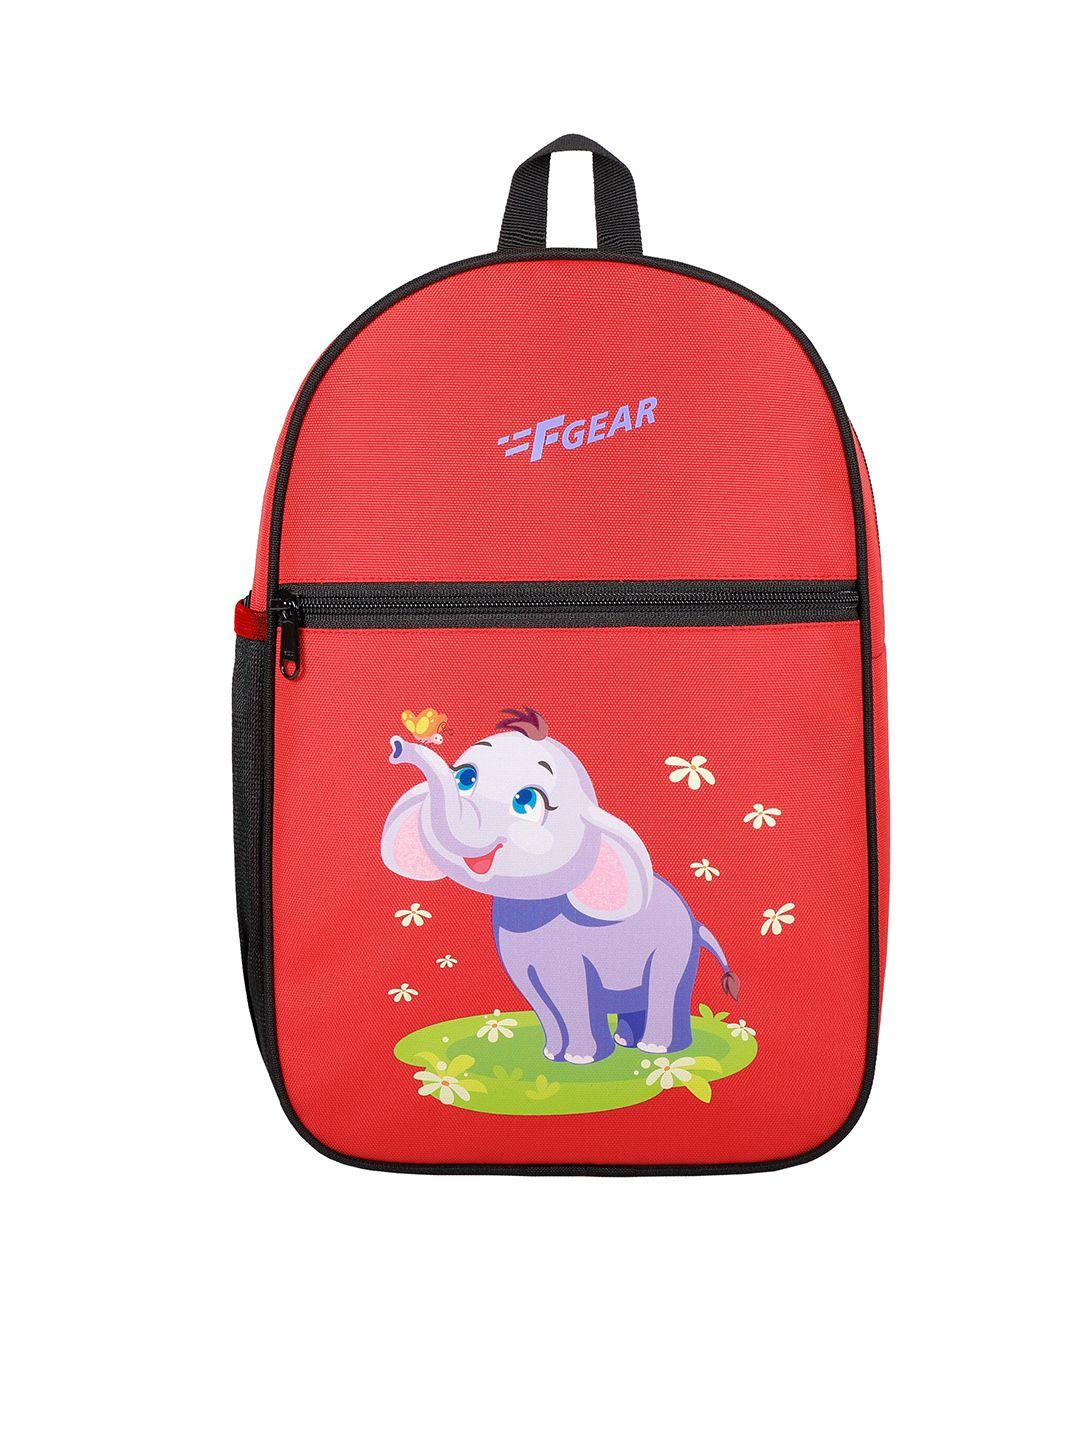 f gear unisex kids red graphic backpack